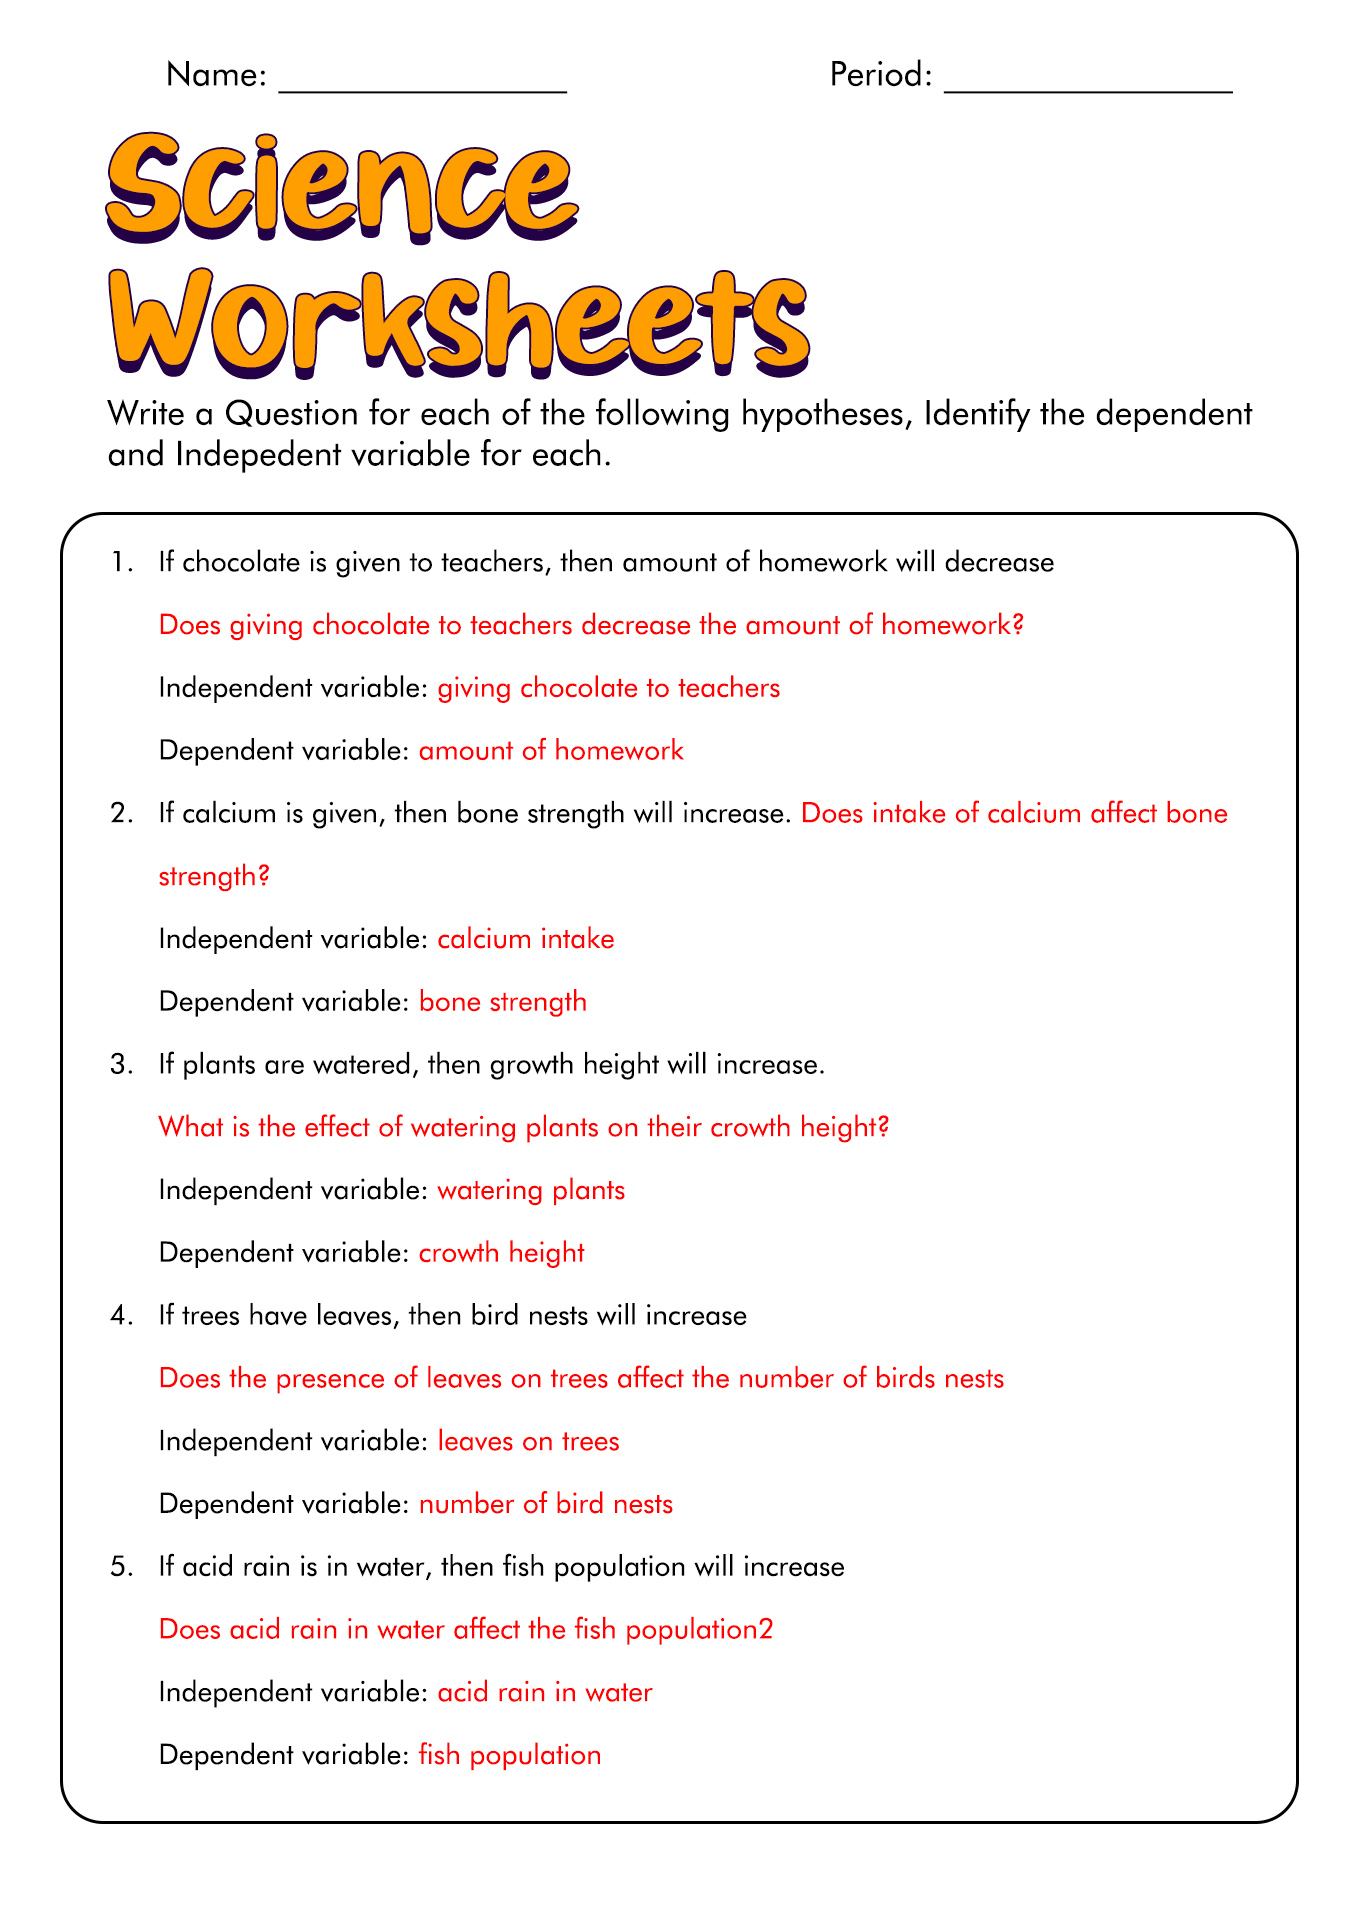 14-best-images-of-worksheets-life-science-vocabulary-science-worksheets-with-answer-key-3rd